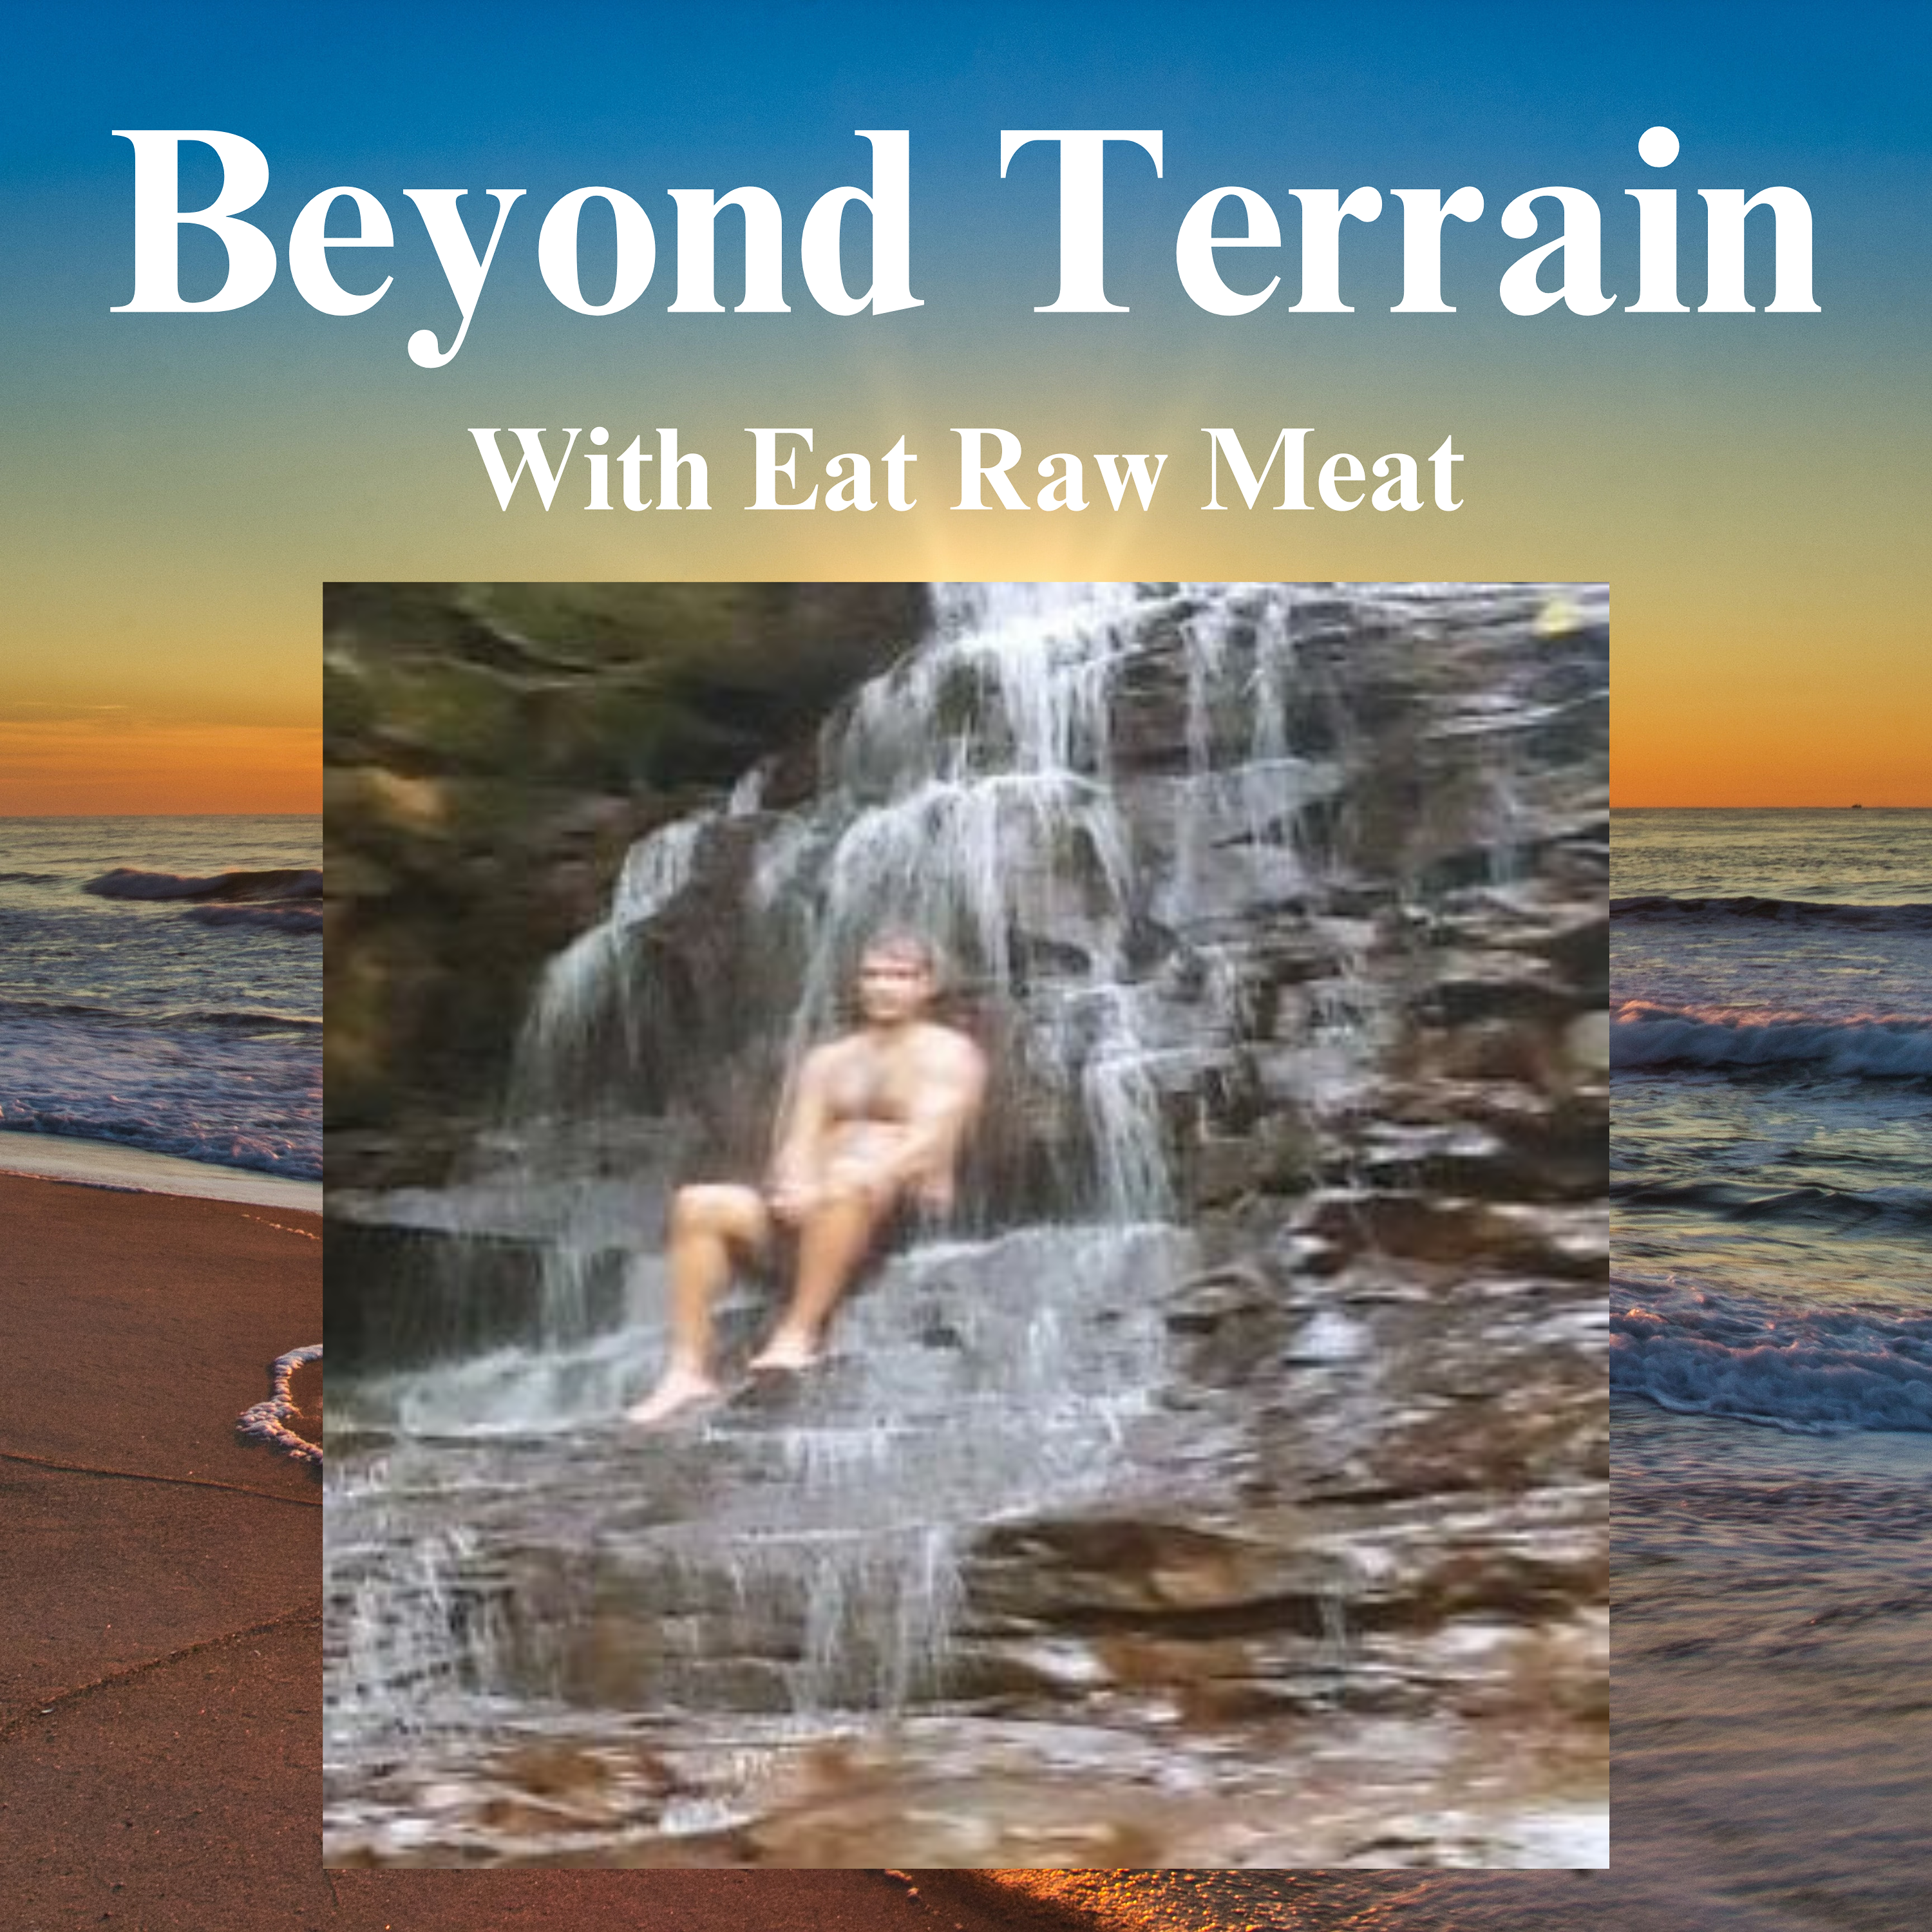 Eat Raw Meat on the Primal Diet, Gaining Weight, Antinutrients and Raw Meat!